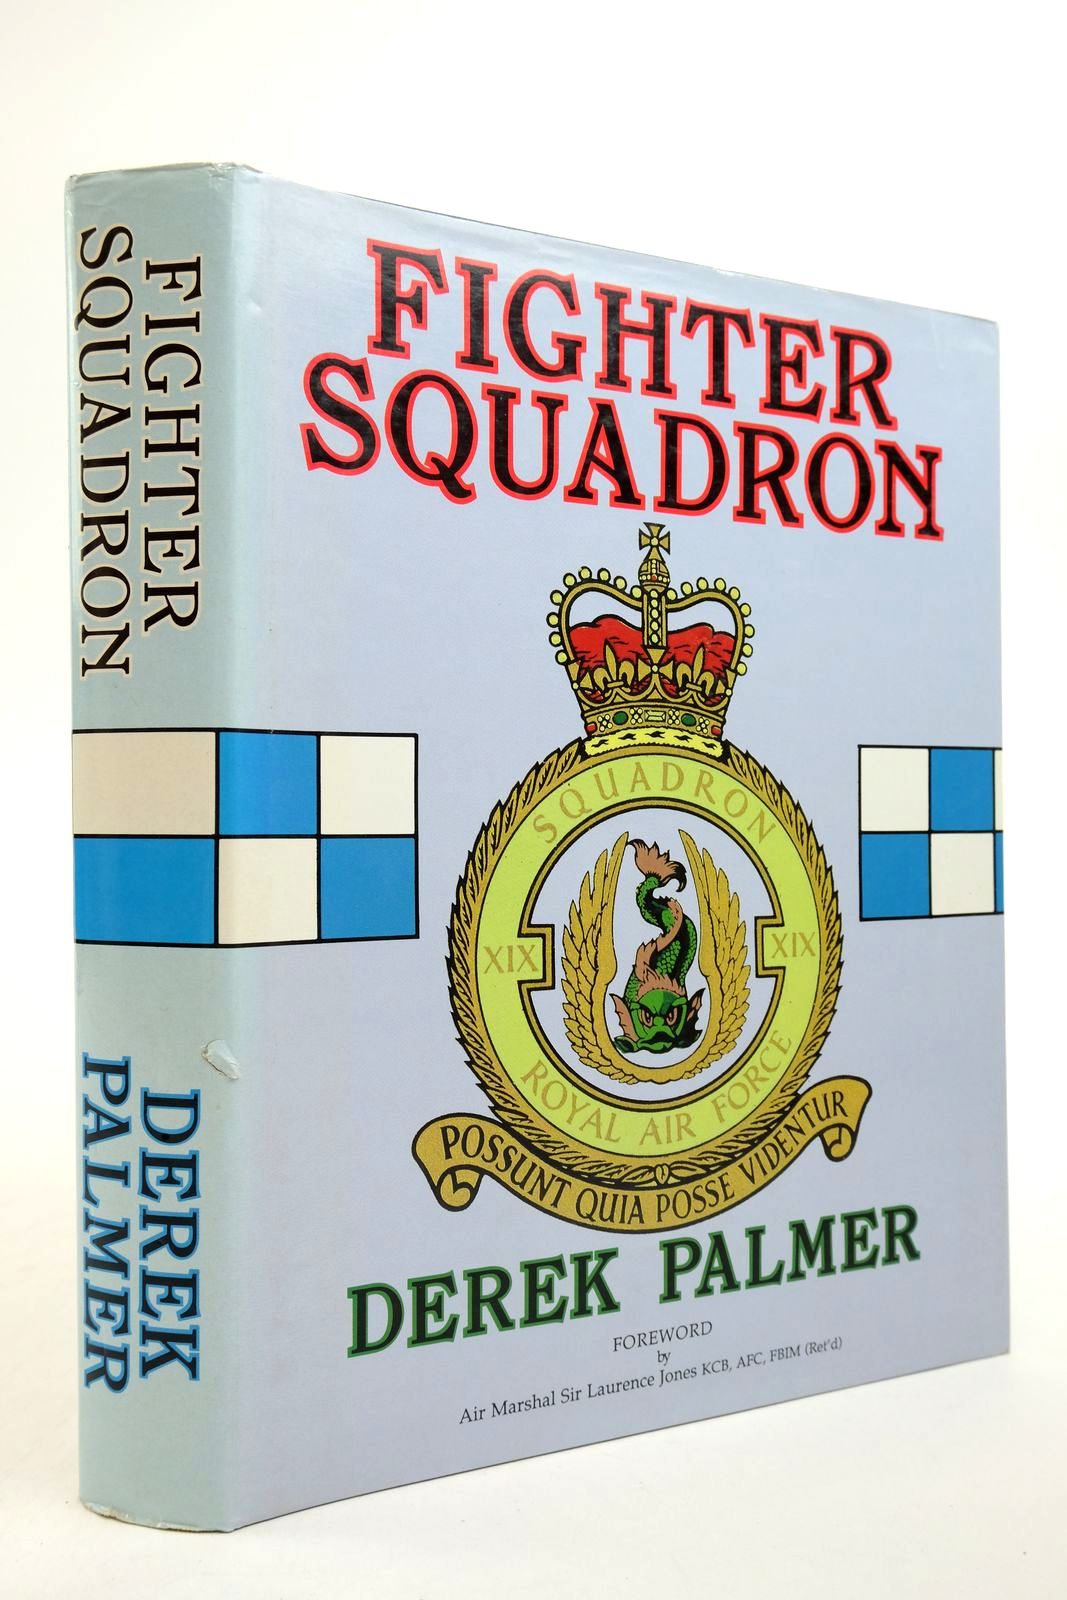 Photo of FIGHTER SQUADRON written by Palmer, Derek published by The Self Publishing Association Ltd. (STOCK CODE: 2139888)  for sale by Stella & Rose's Books